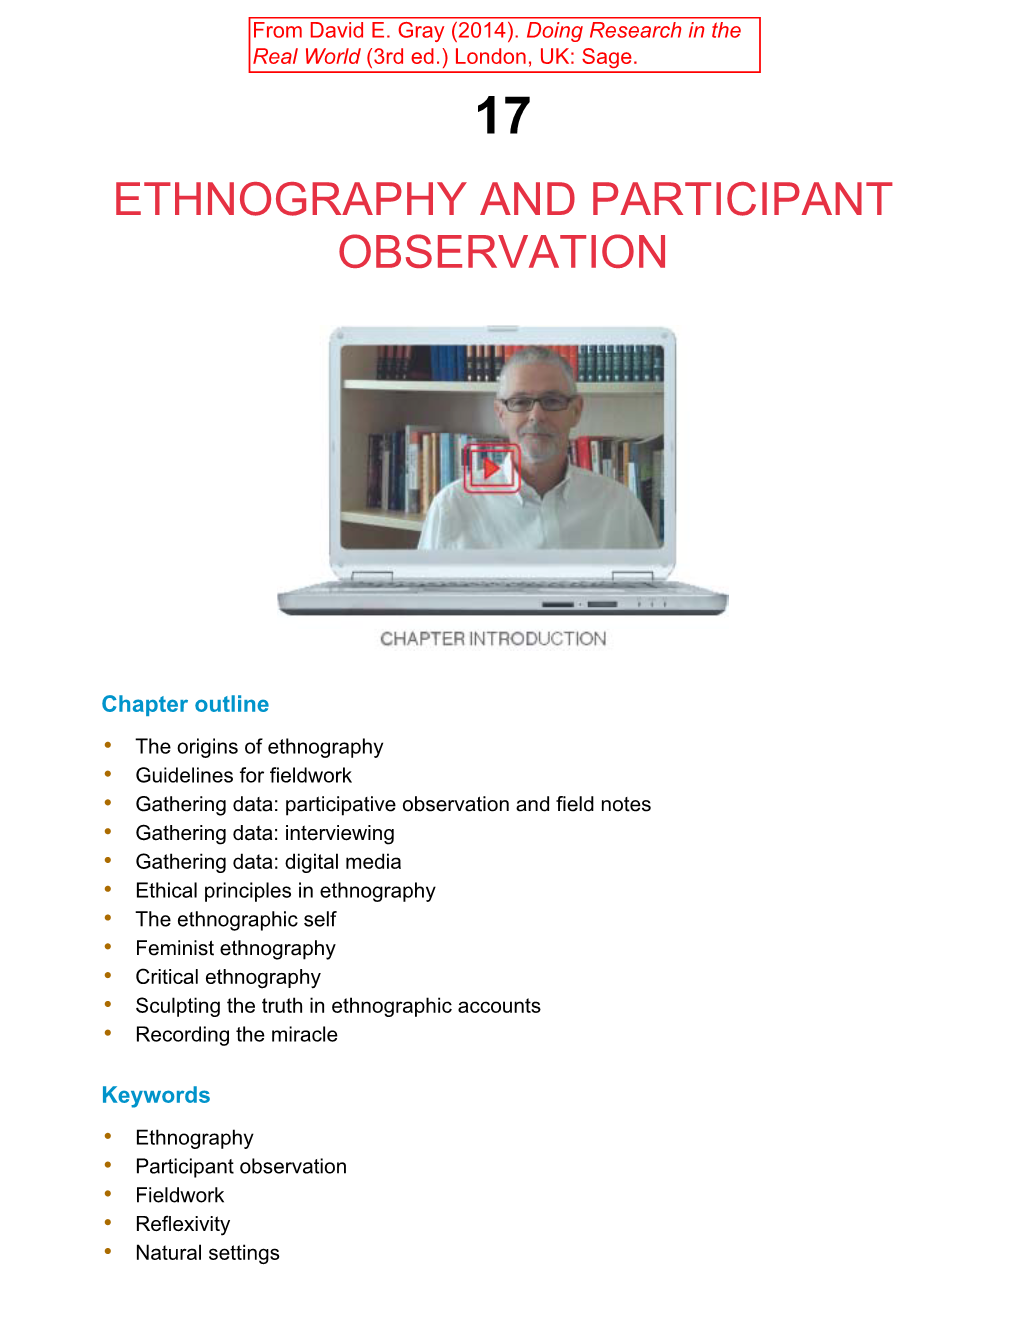 Ethnography and Participant Observation